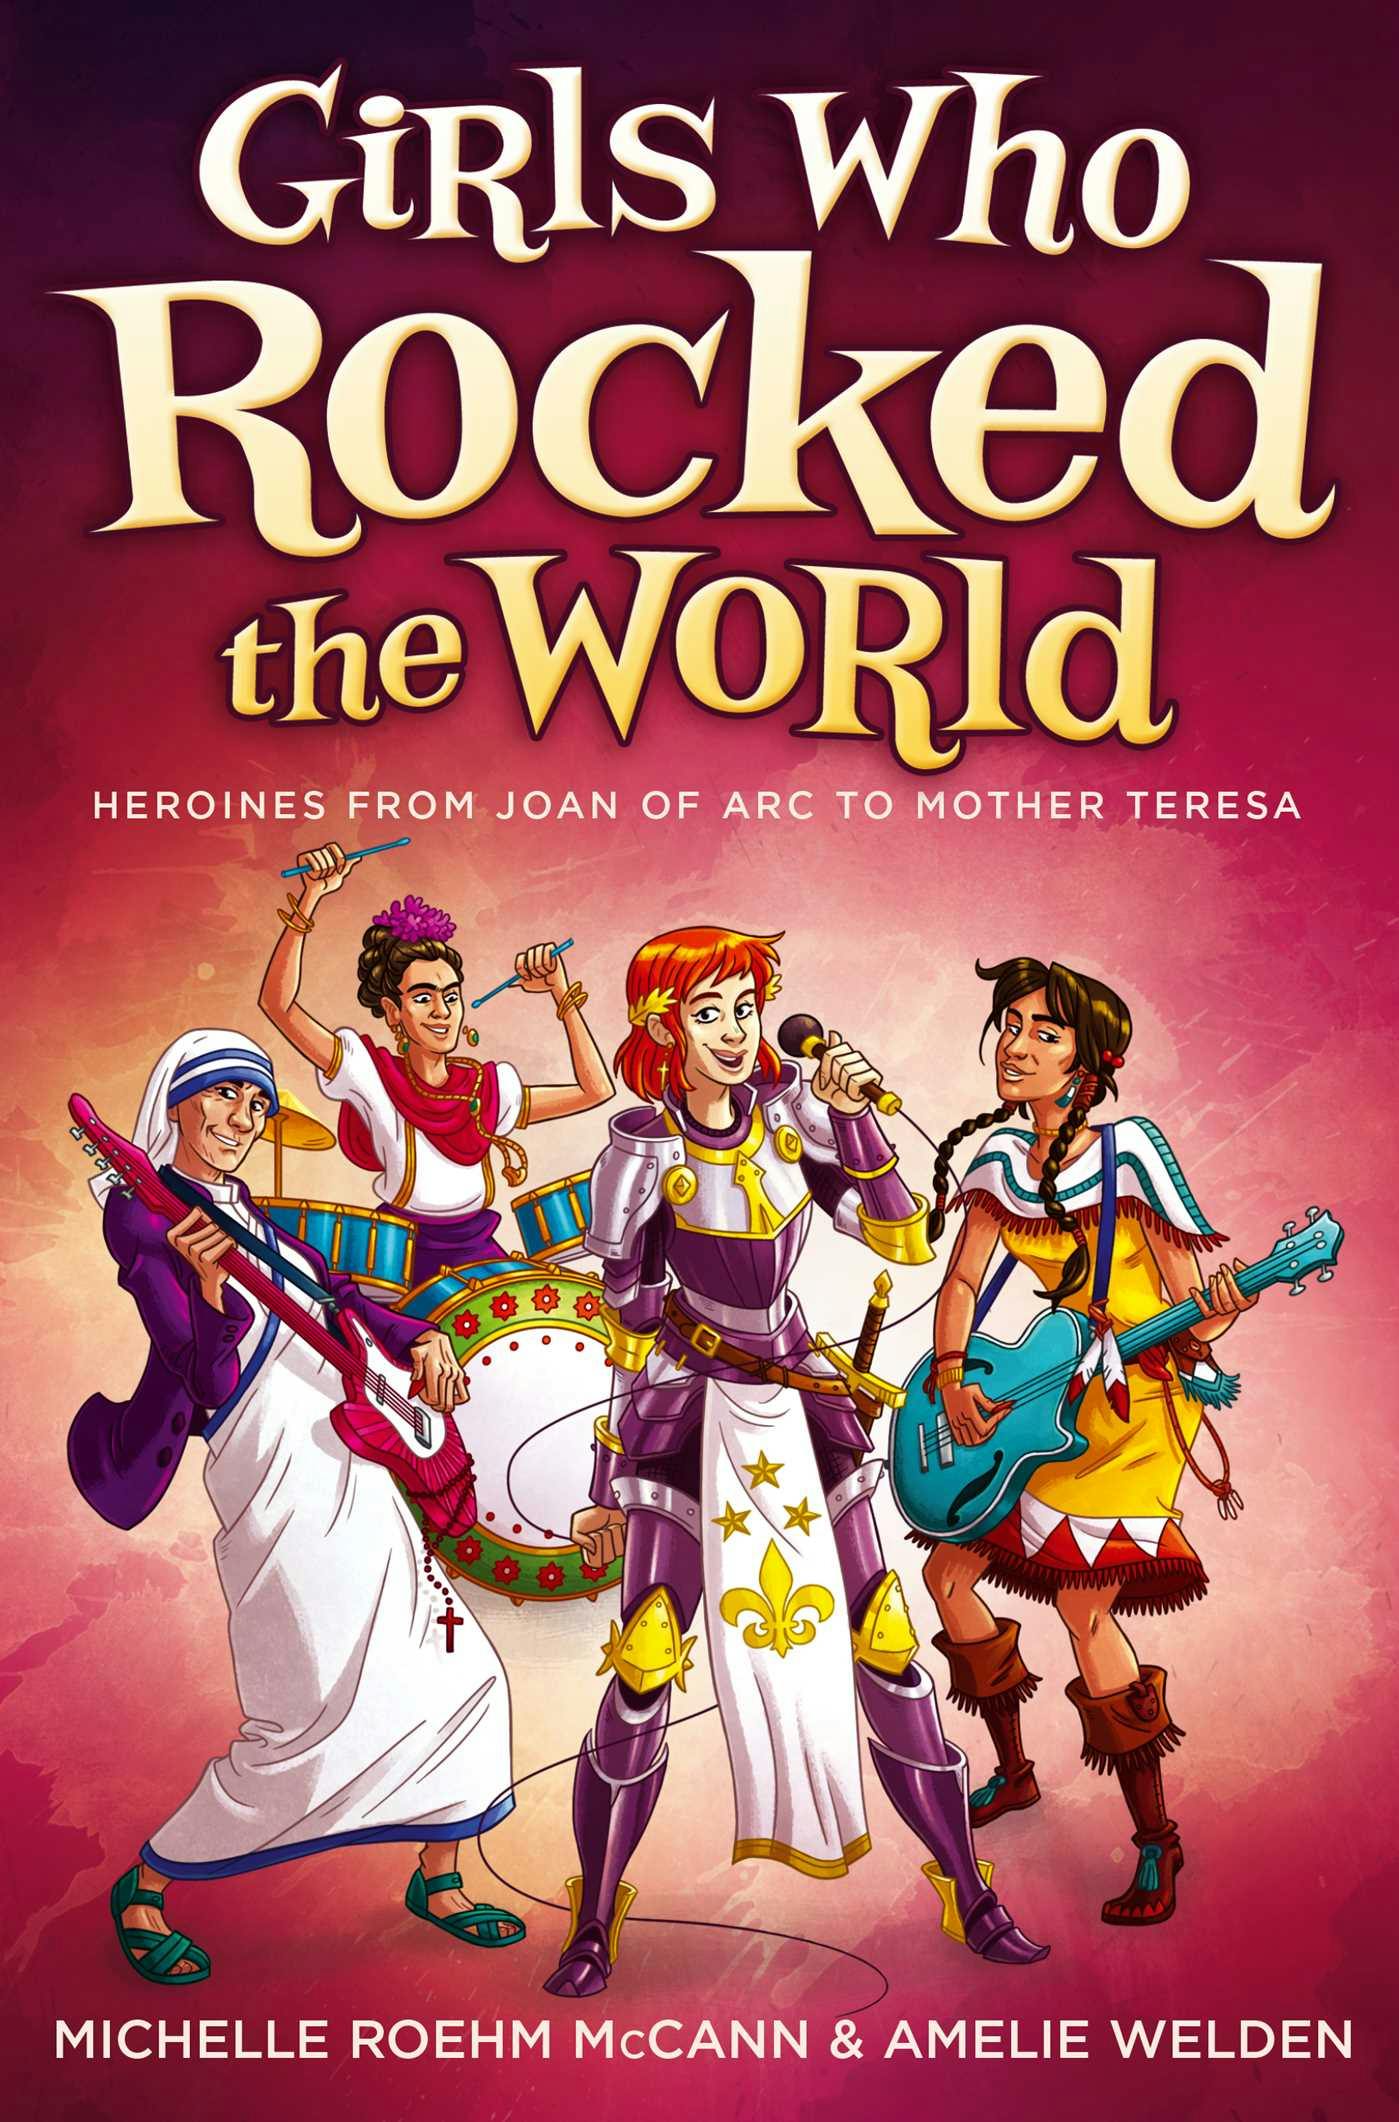 Girls Who Rocked the World: Heroines from Joan of Arc to Mother Teresa - Amelie Welden, Michelle Roehm McCann